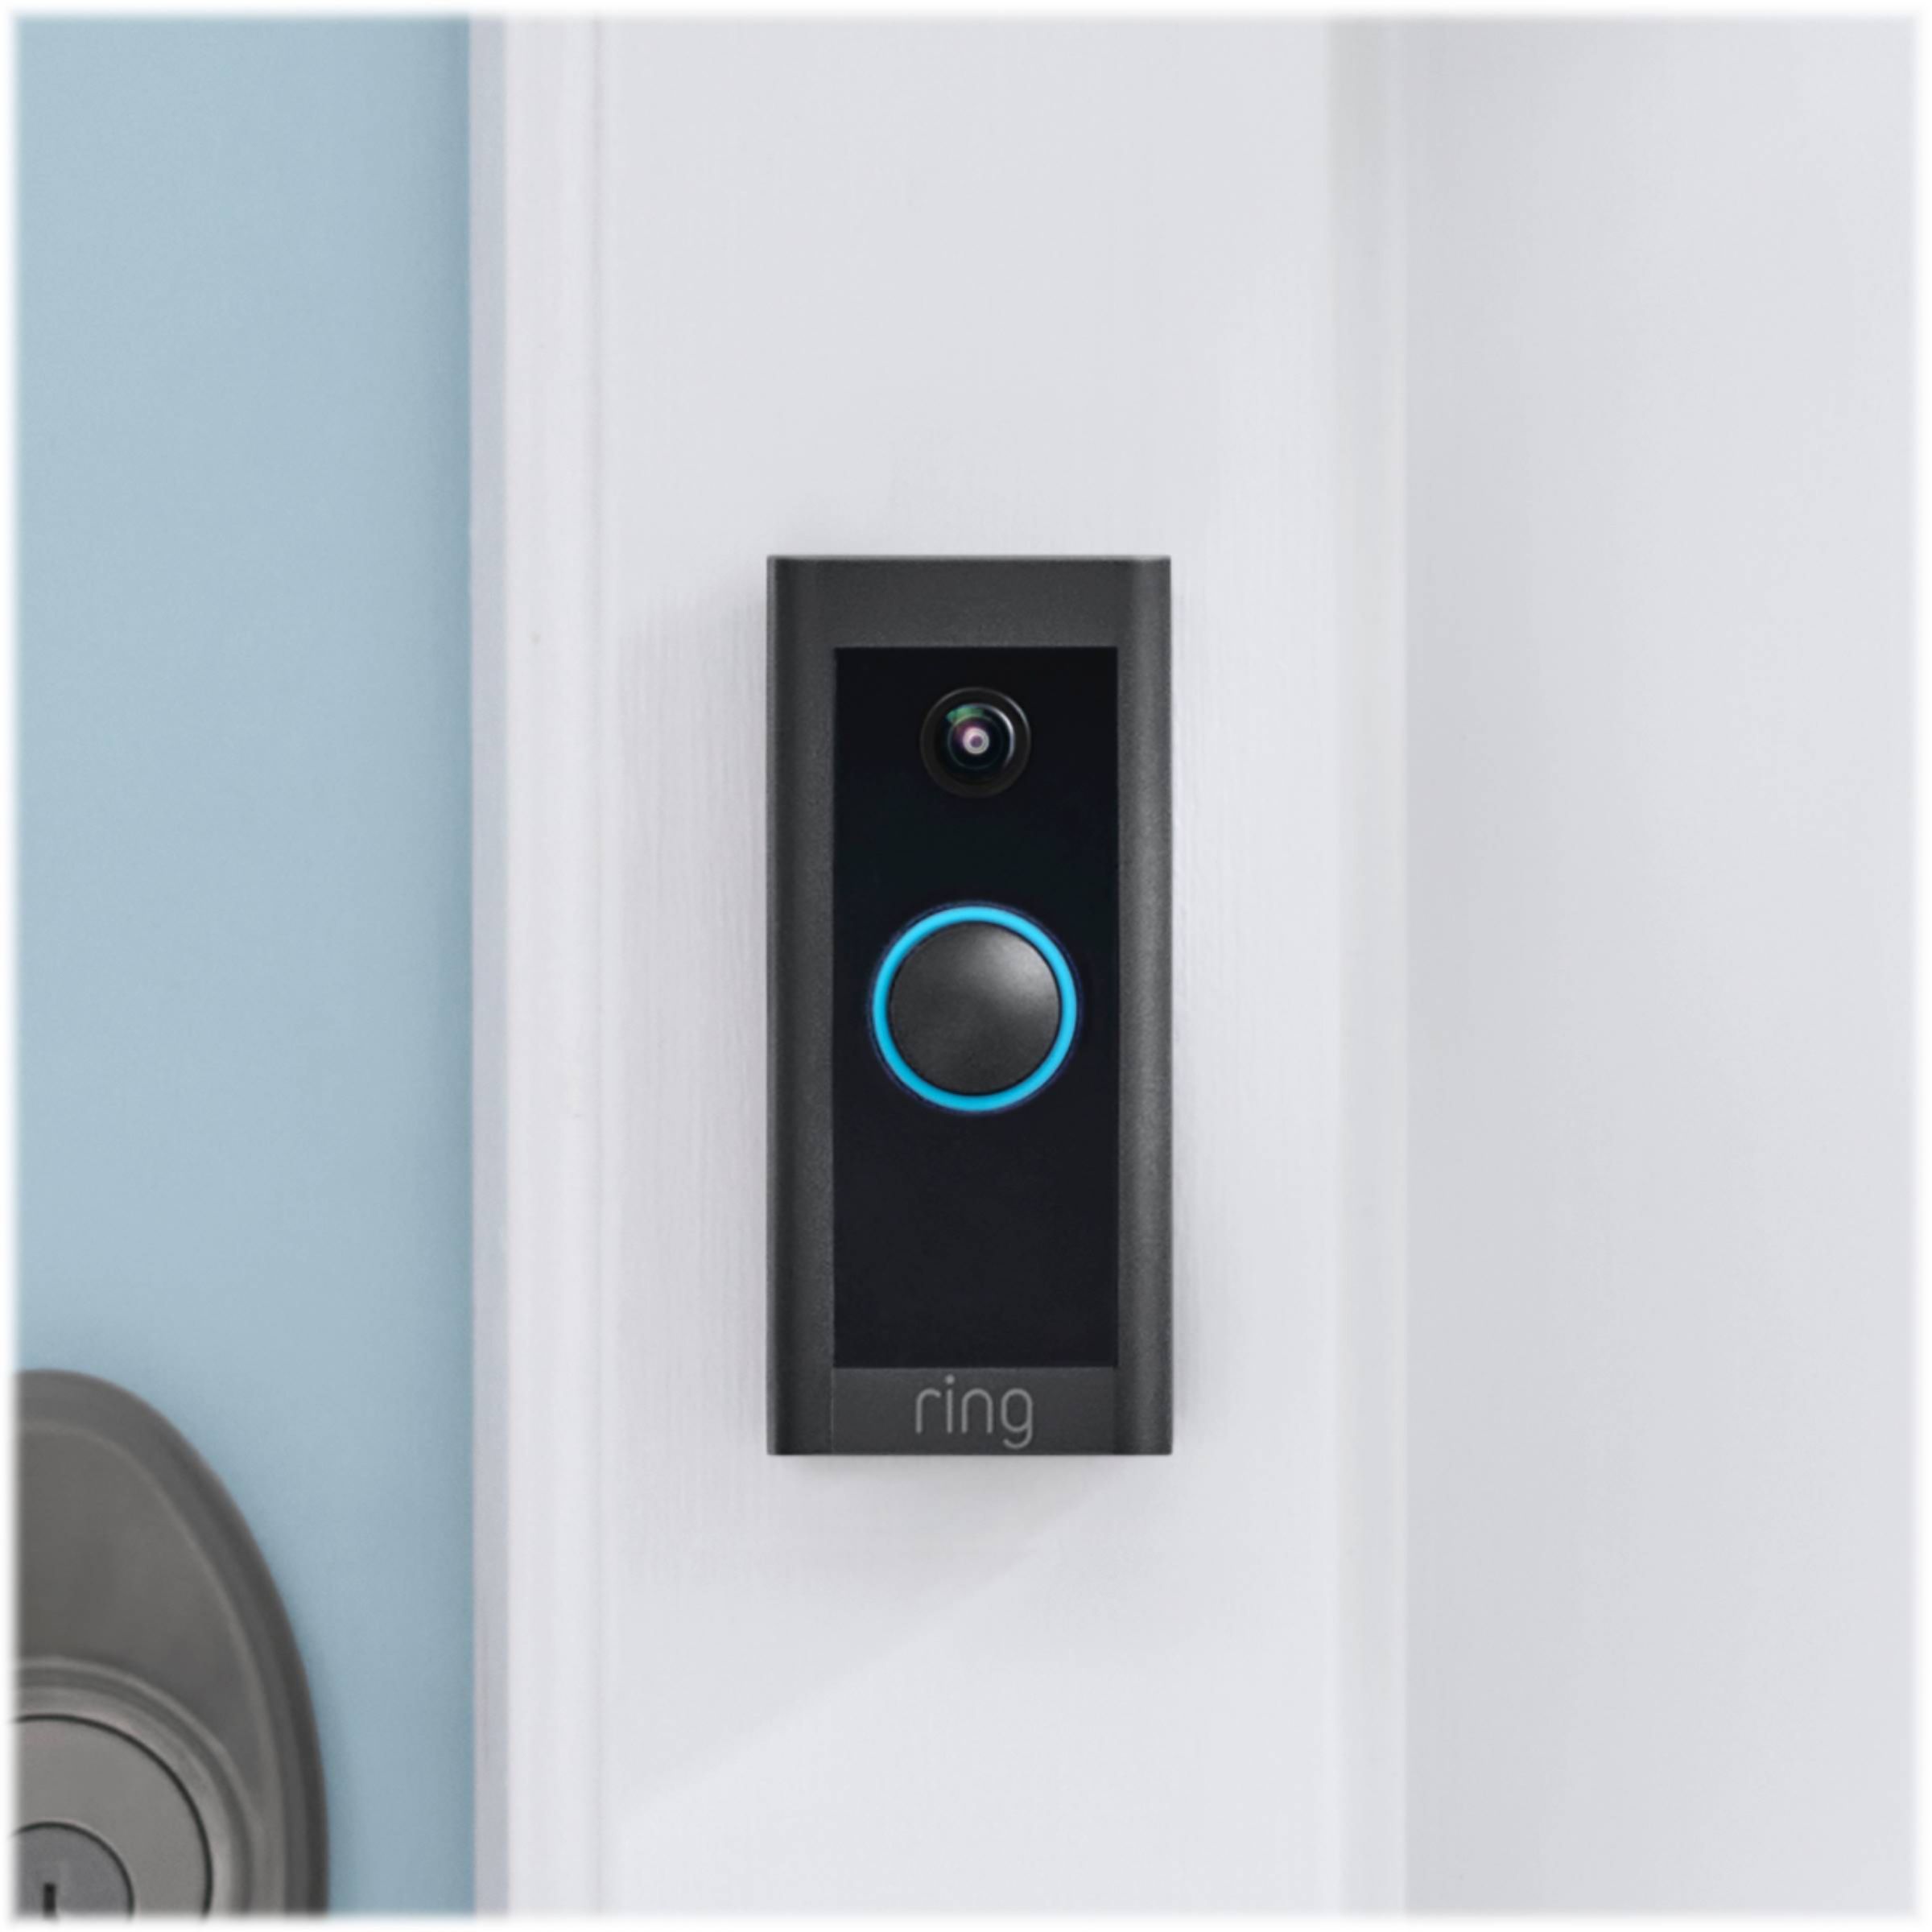 Ring Doorbell Doesn't See Wi-Fi - MajorGeeks